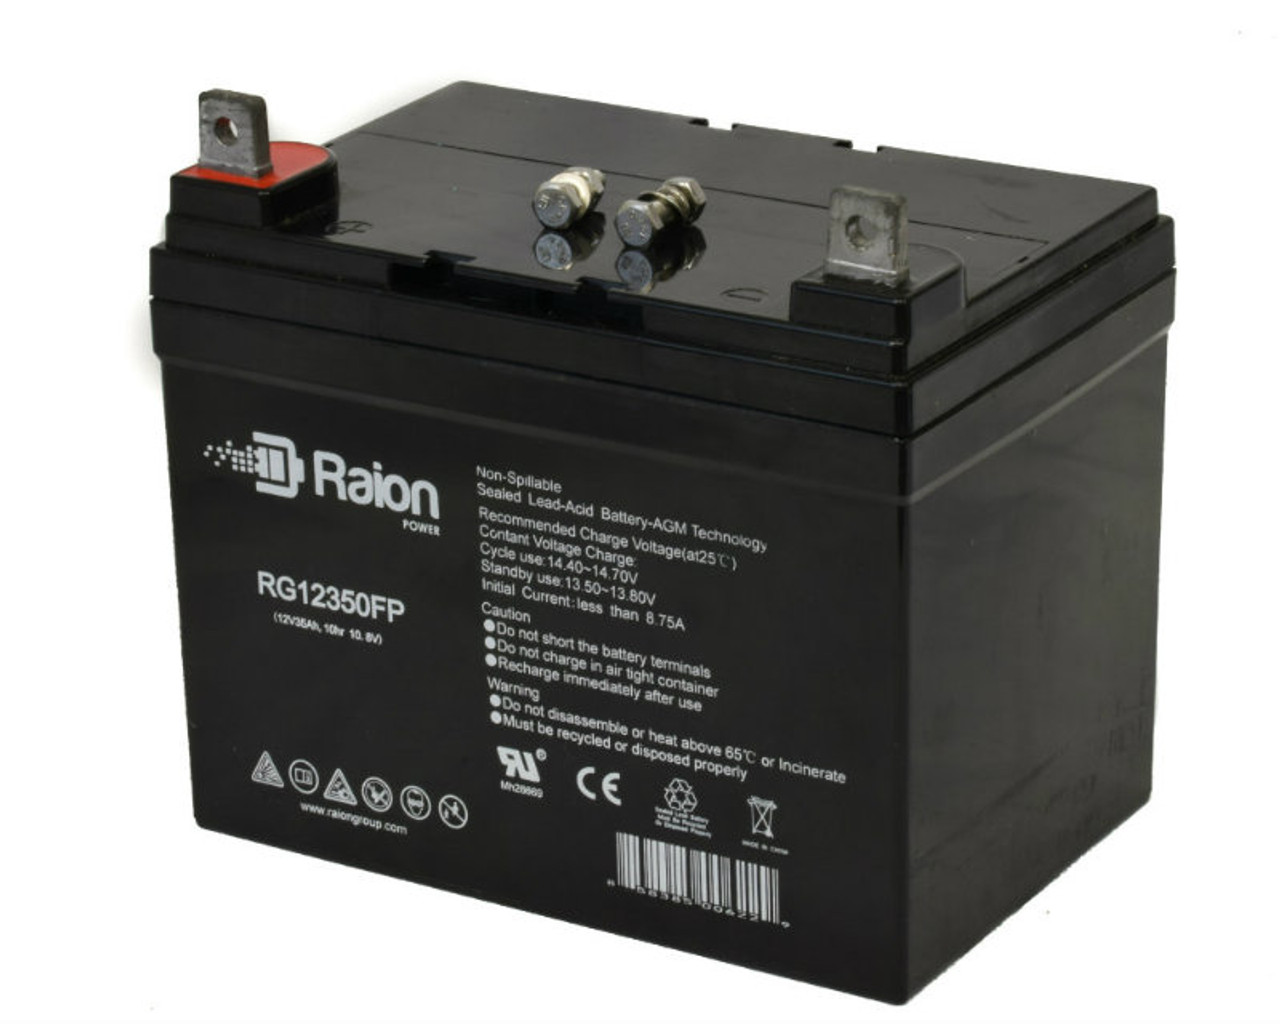 Raion Power Replacement 12V 35Ah RG12350FP Battery for Ariens Gravely 1450H